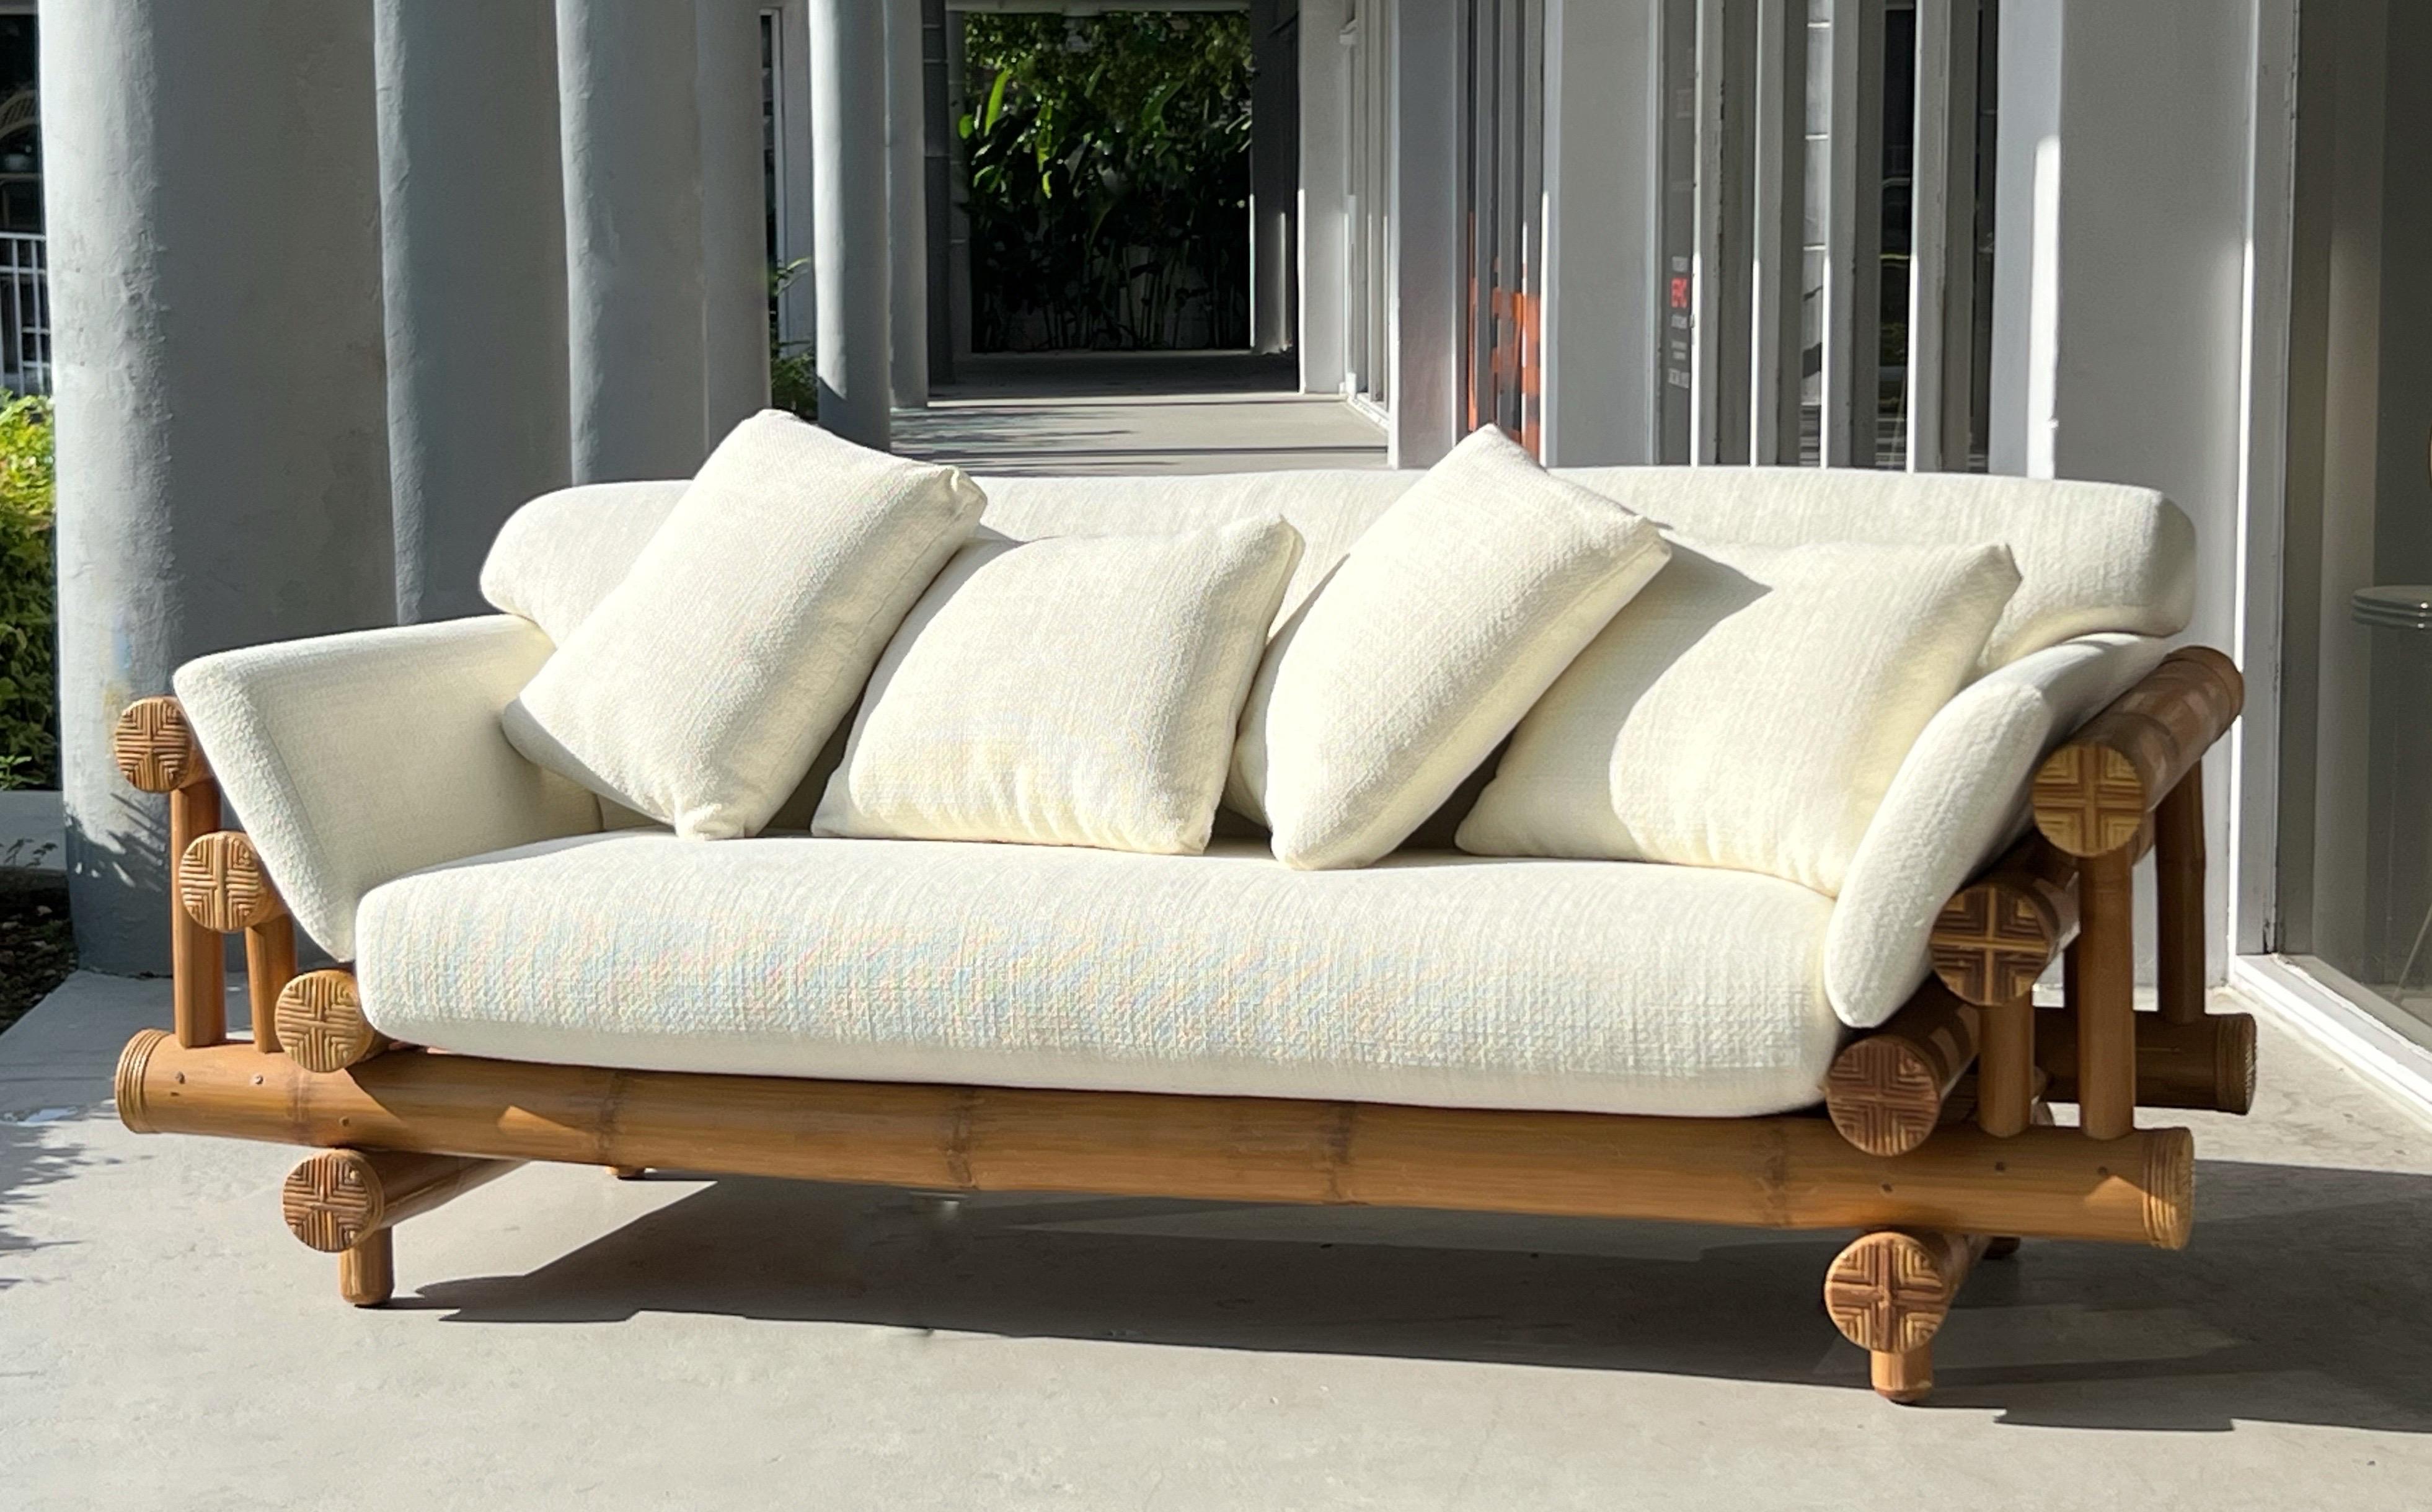 A great bamboo sofa. We also have a matching pair of lounge chairs. 